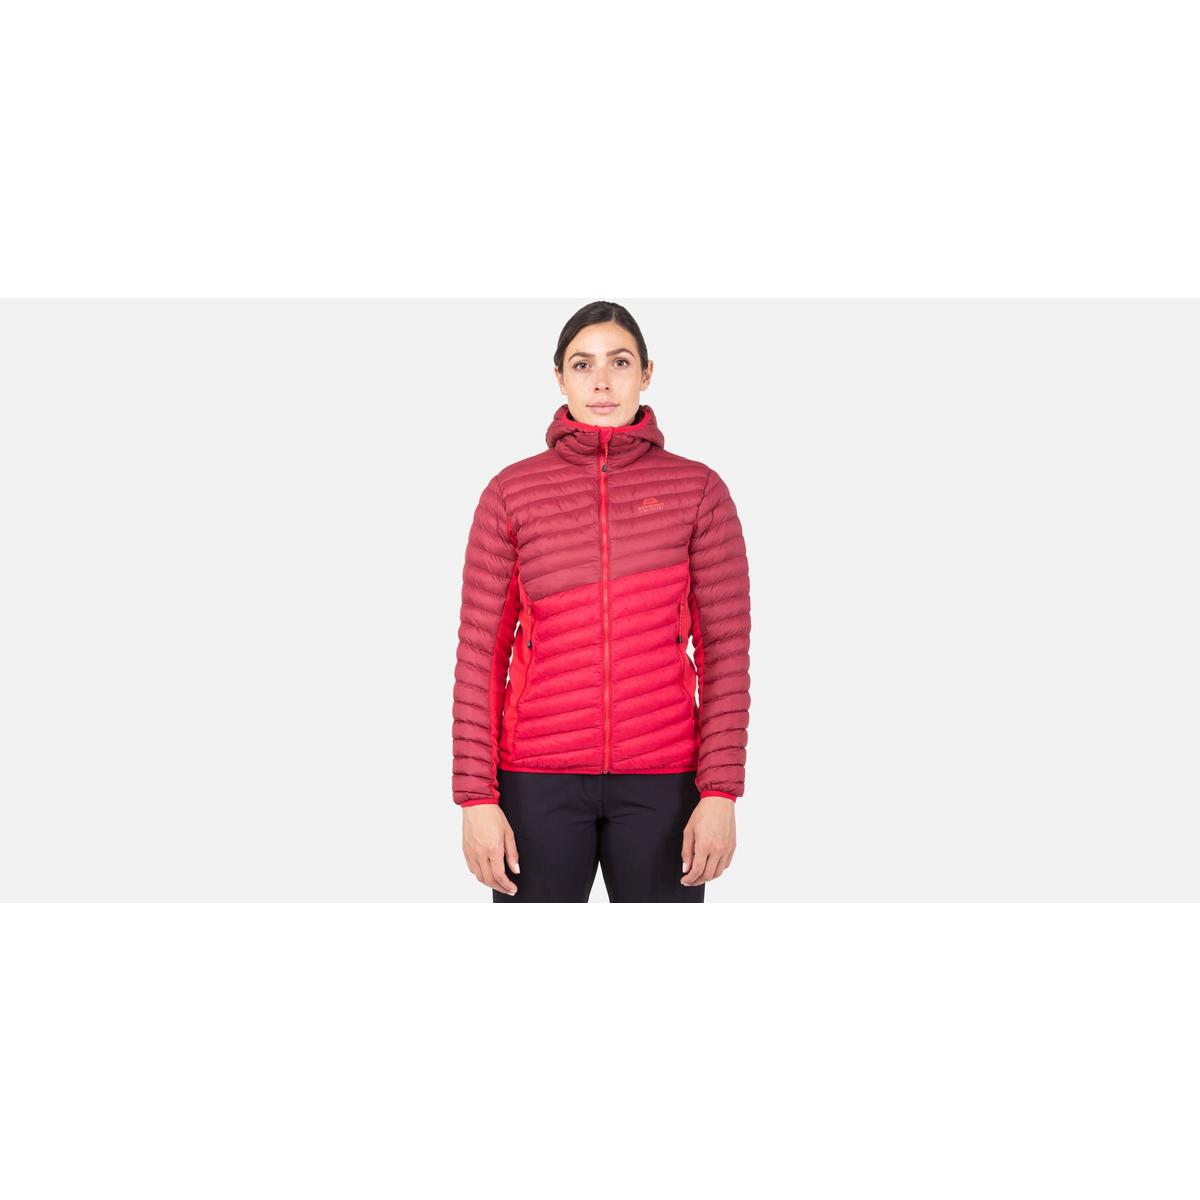 Particle Hooded Women's Jacket